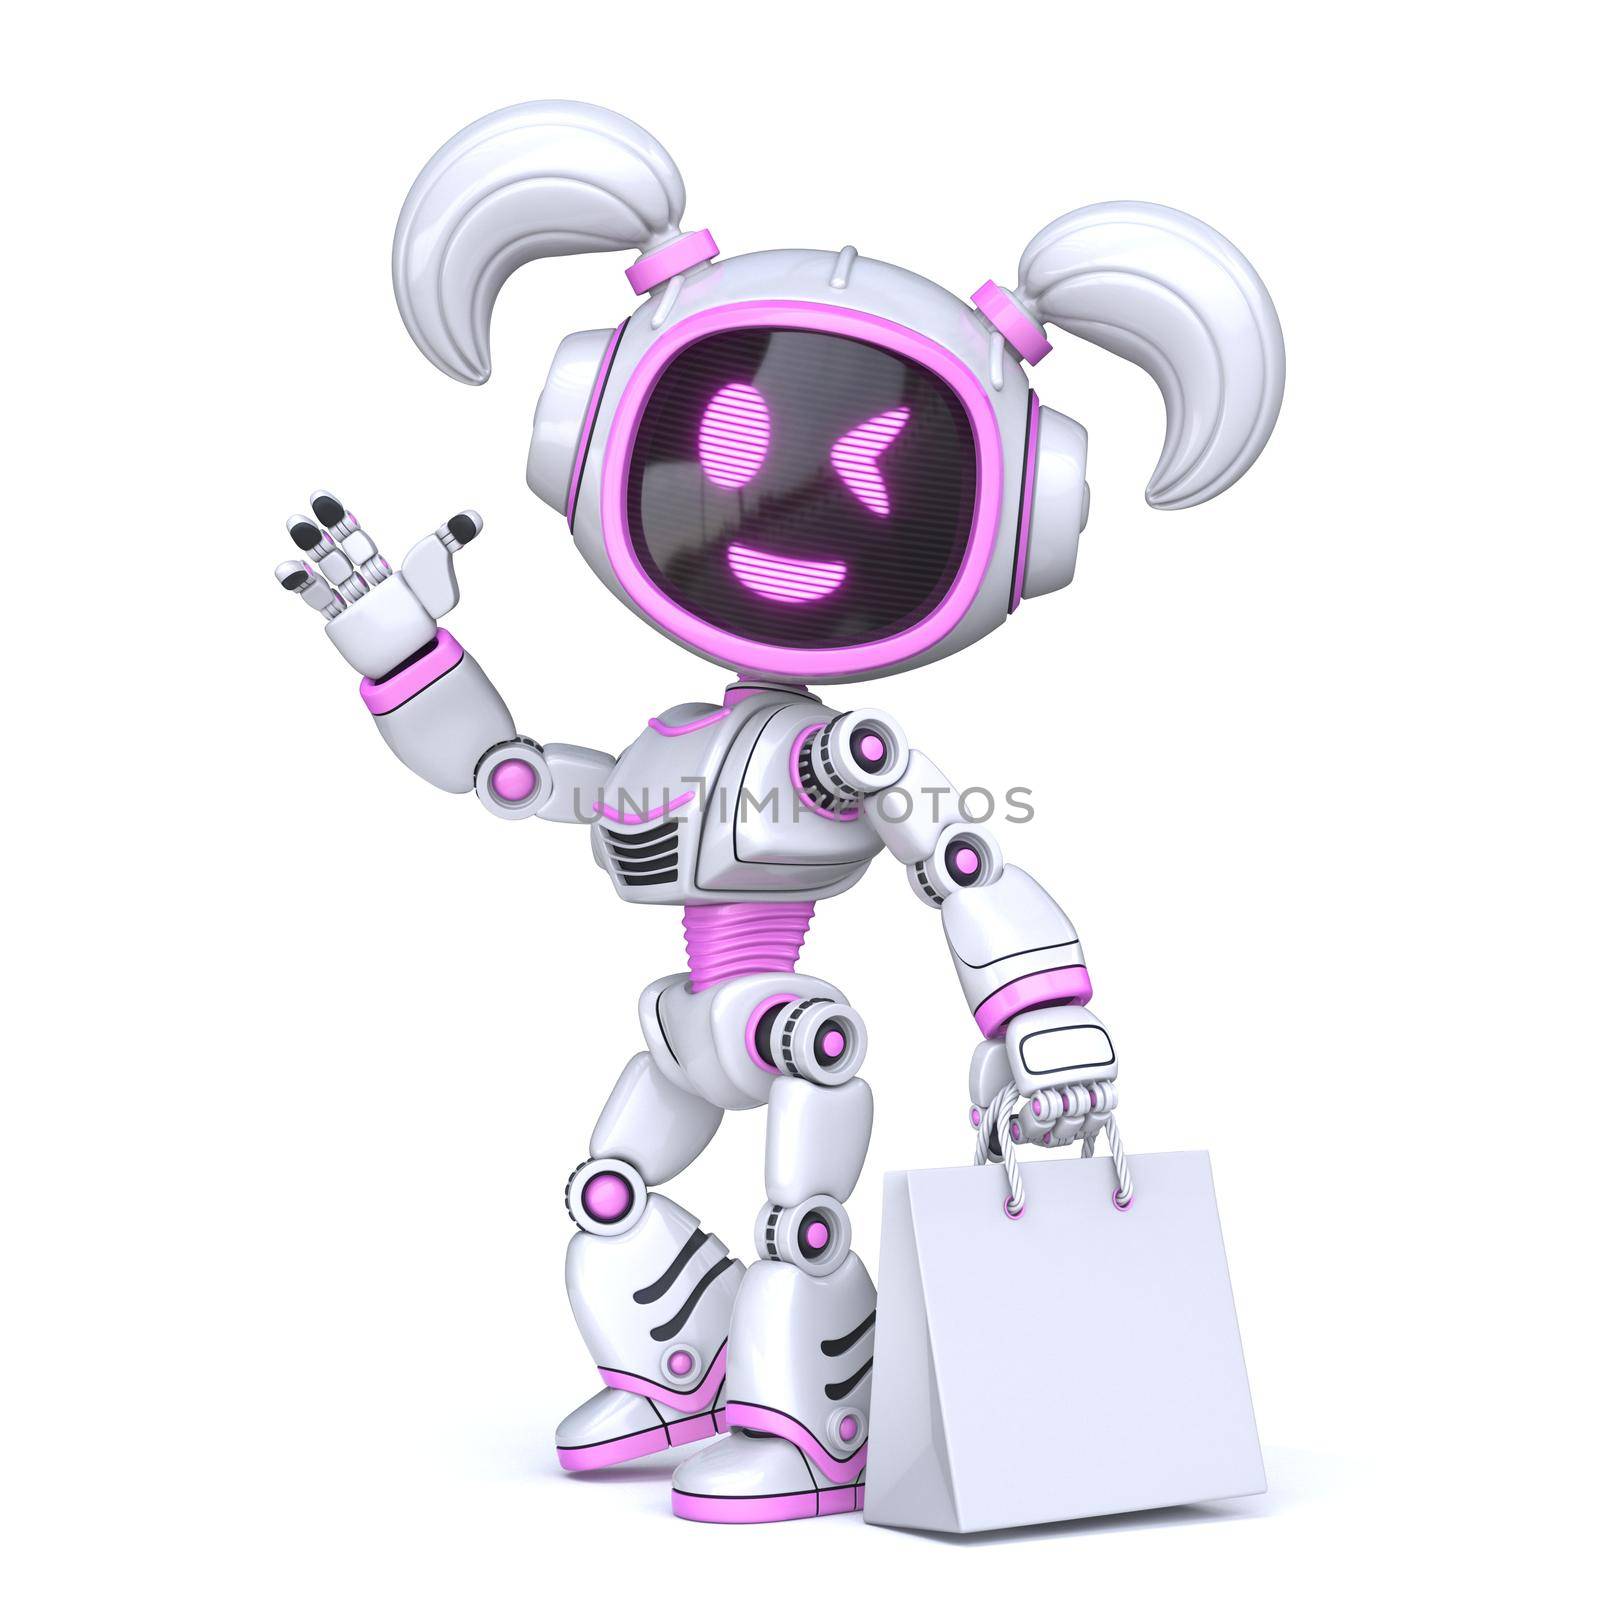 Cute pink girl robot whit blank shopping bag 3D rendering illustration isolated on white background